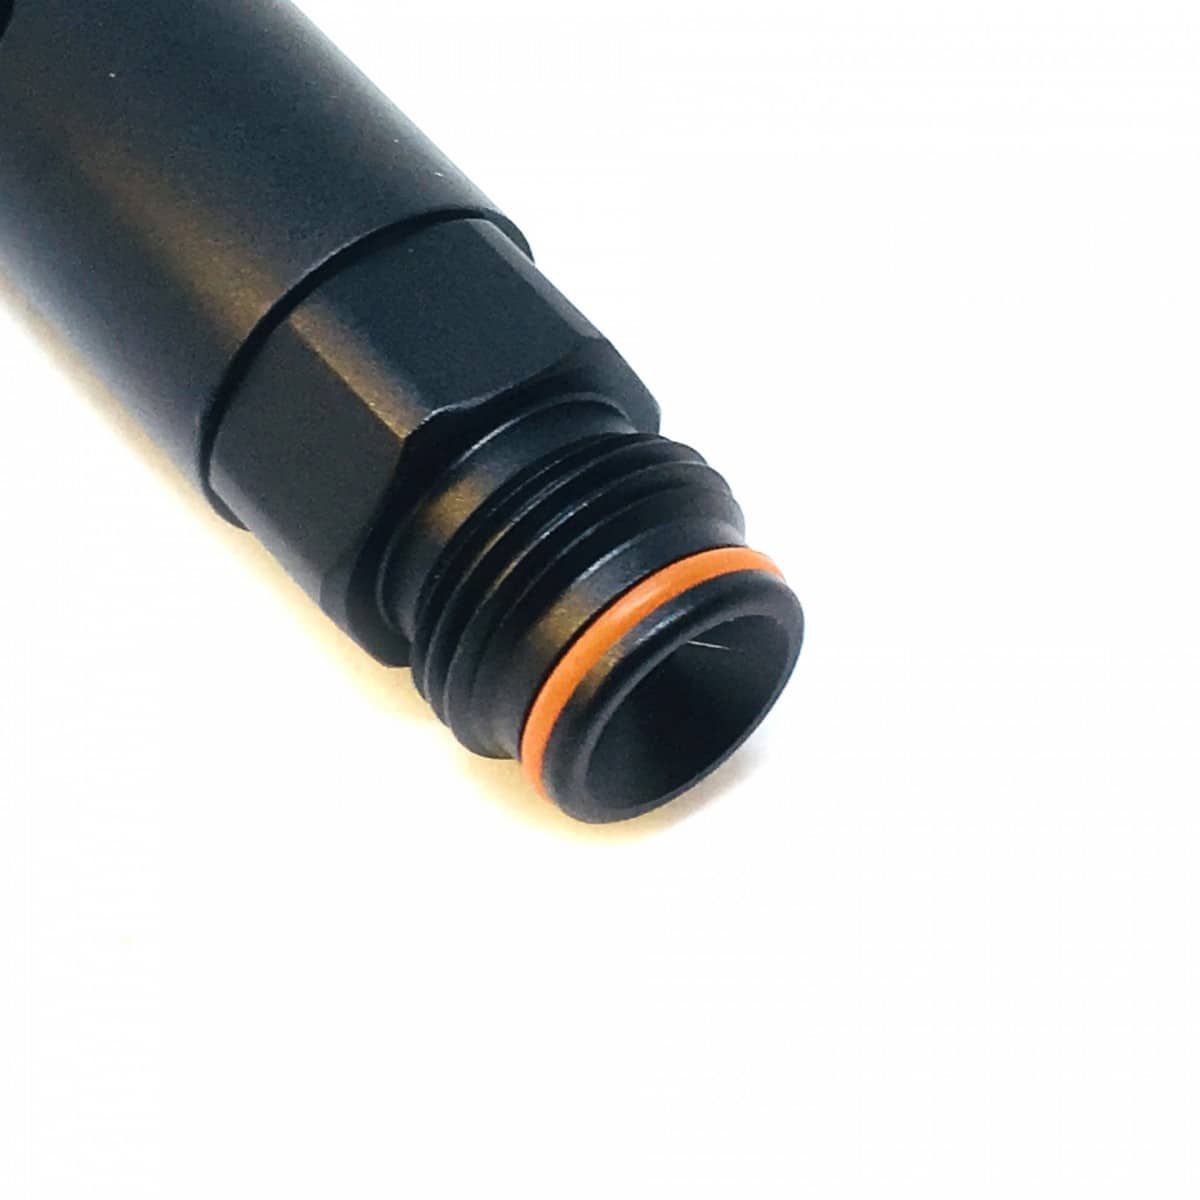 HPA adapter for 12g CO2 cartridge